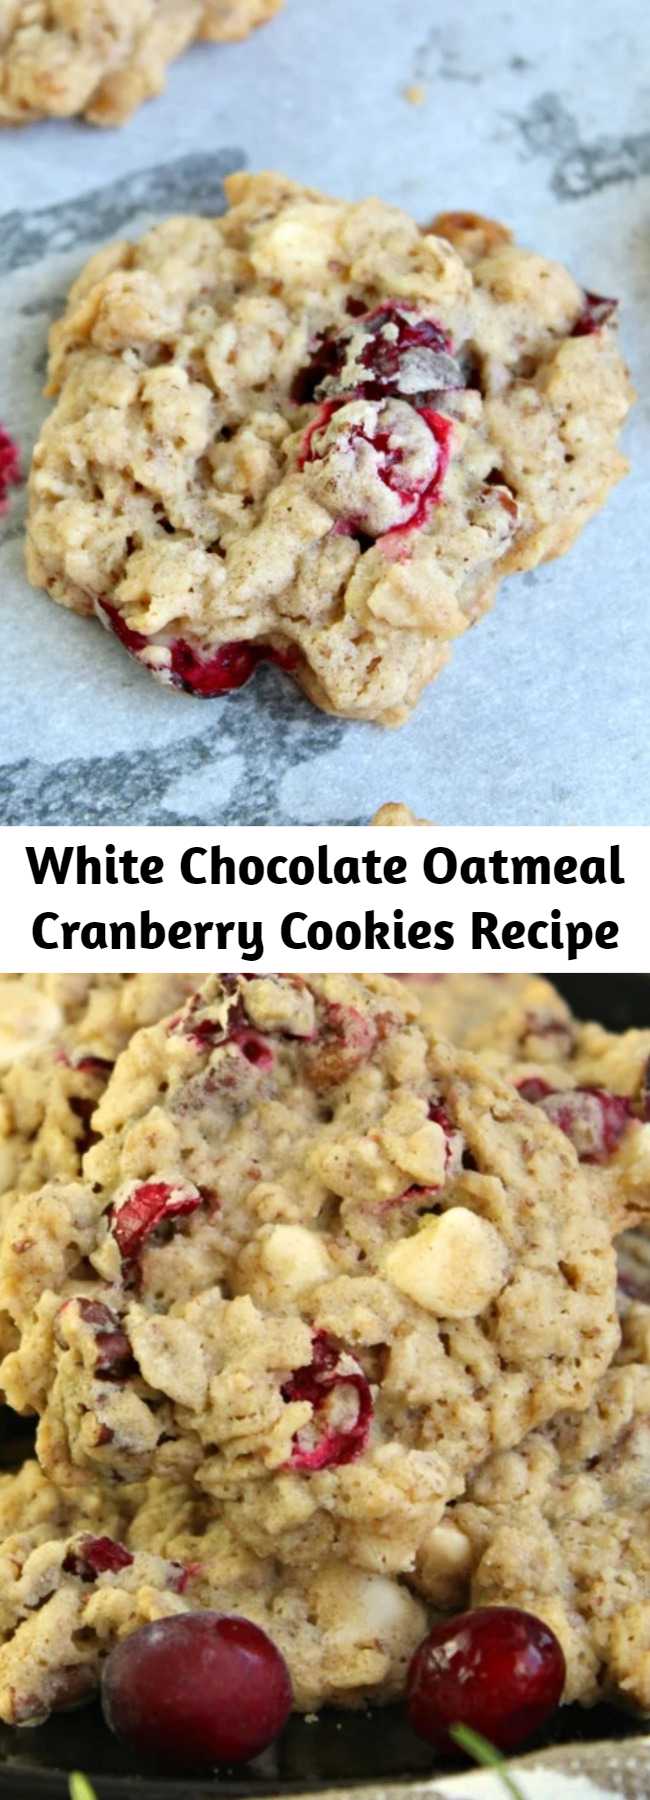 White Chocolate Oatmeal Cranberry Cookies Recipe - Oatmeal Cranberry Cookies with fresh cranberries, oats, white chocolate chips and pecans. A delicious and simple holiday cookie recipe to add to your baking list that everyone will absolutely Love!